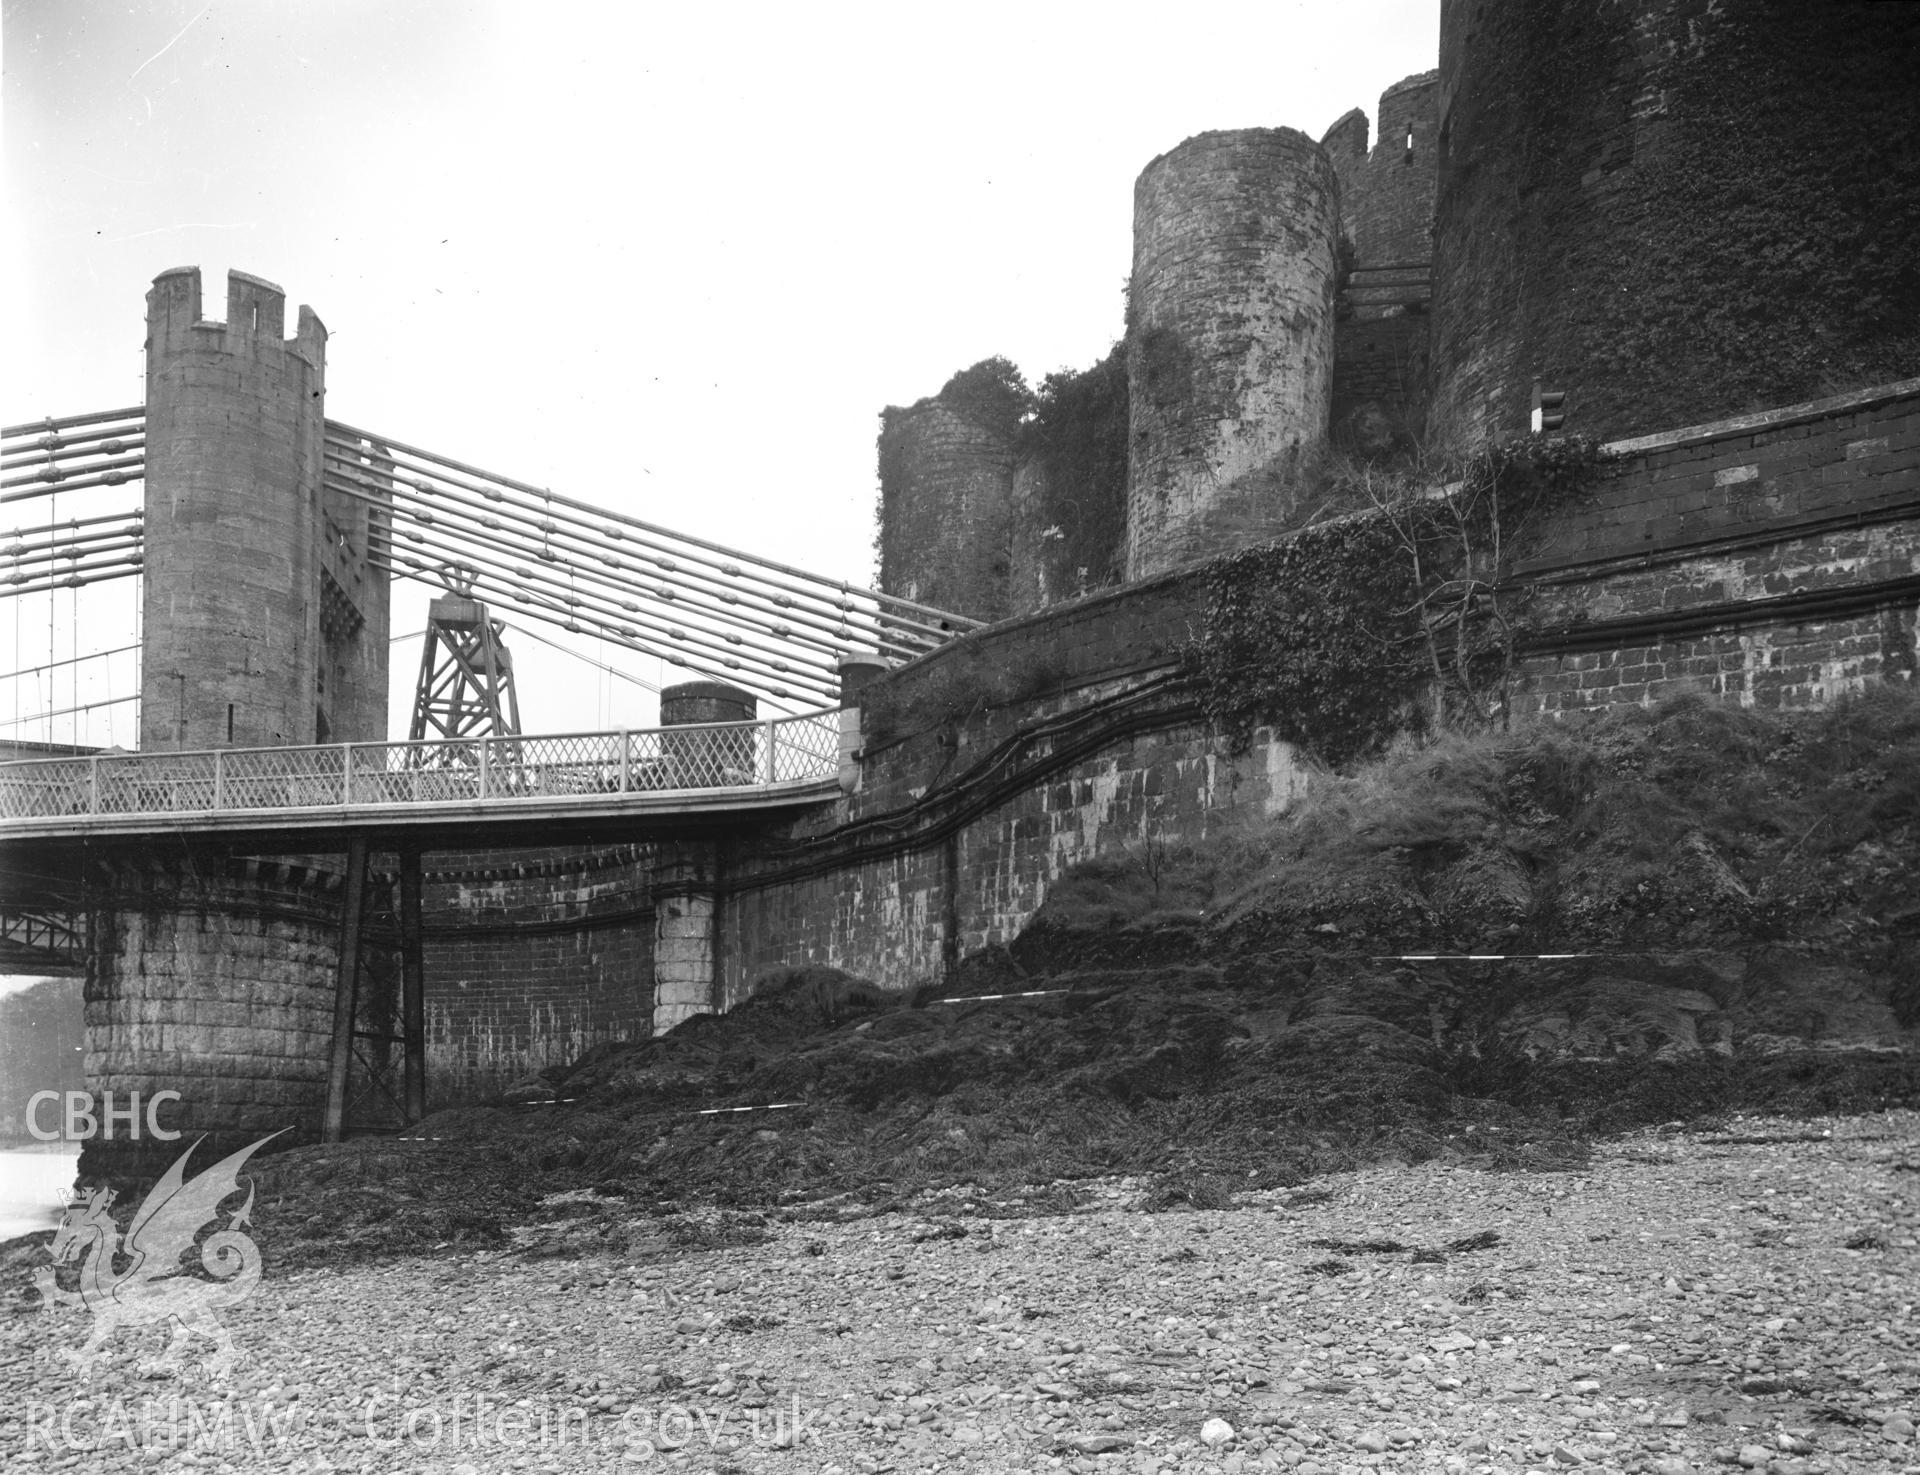 View of bridge and Conwy Castle, taken in 11.01.1952.